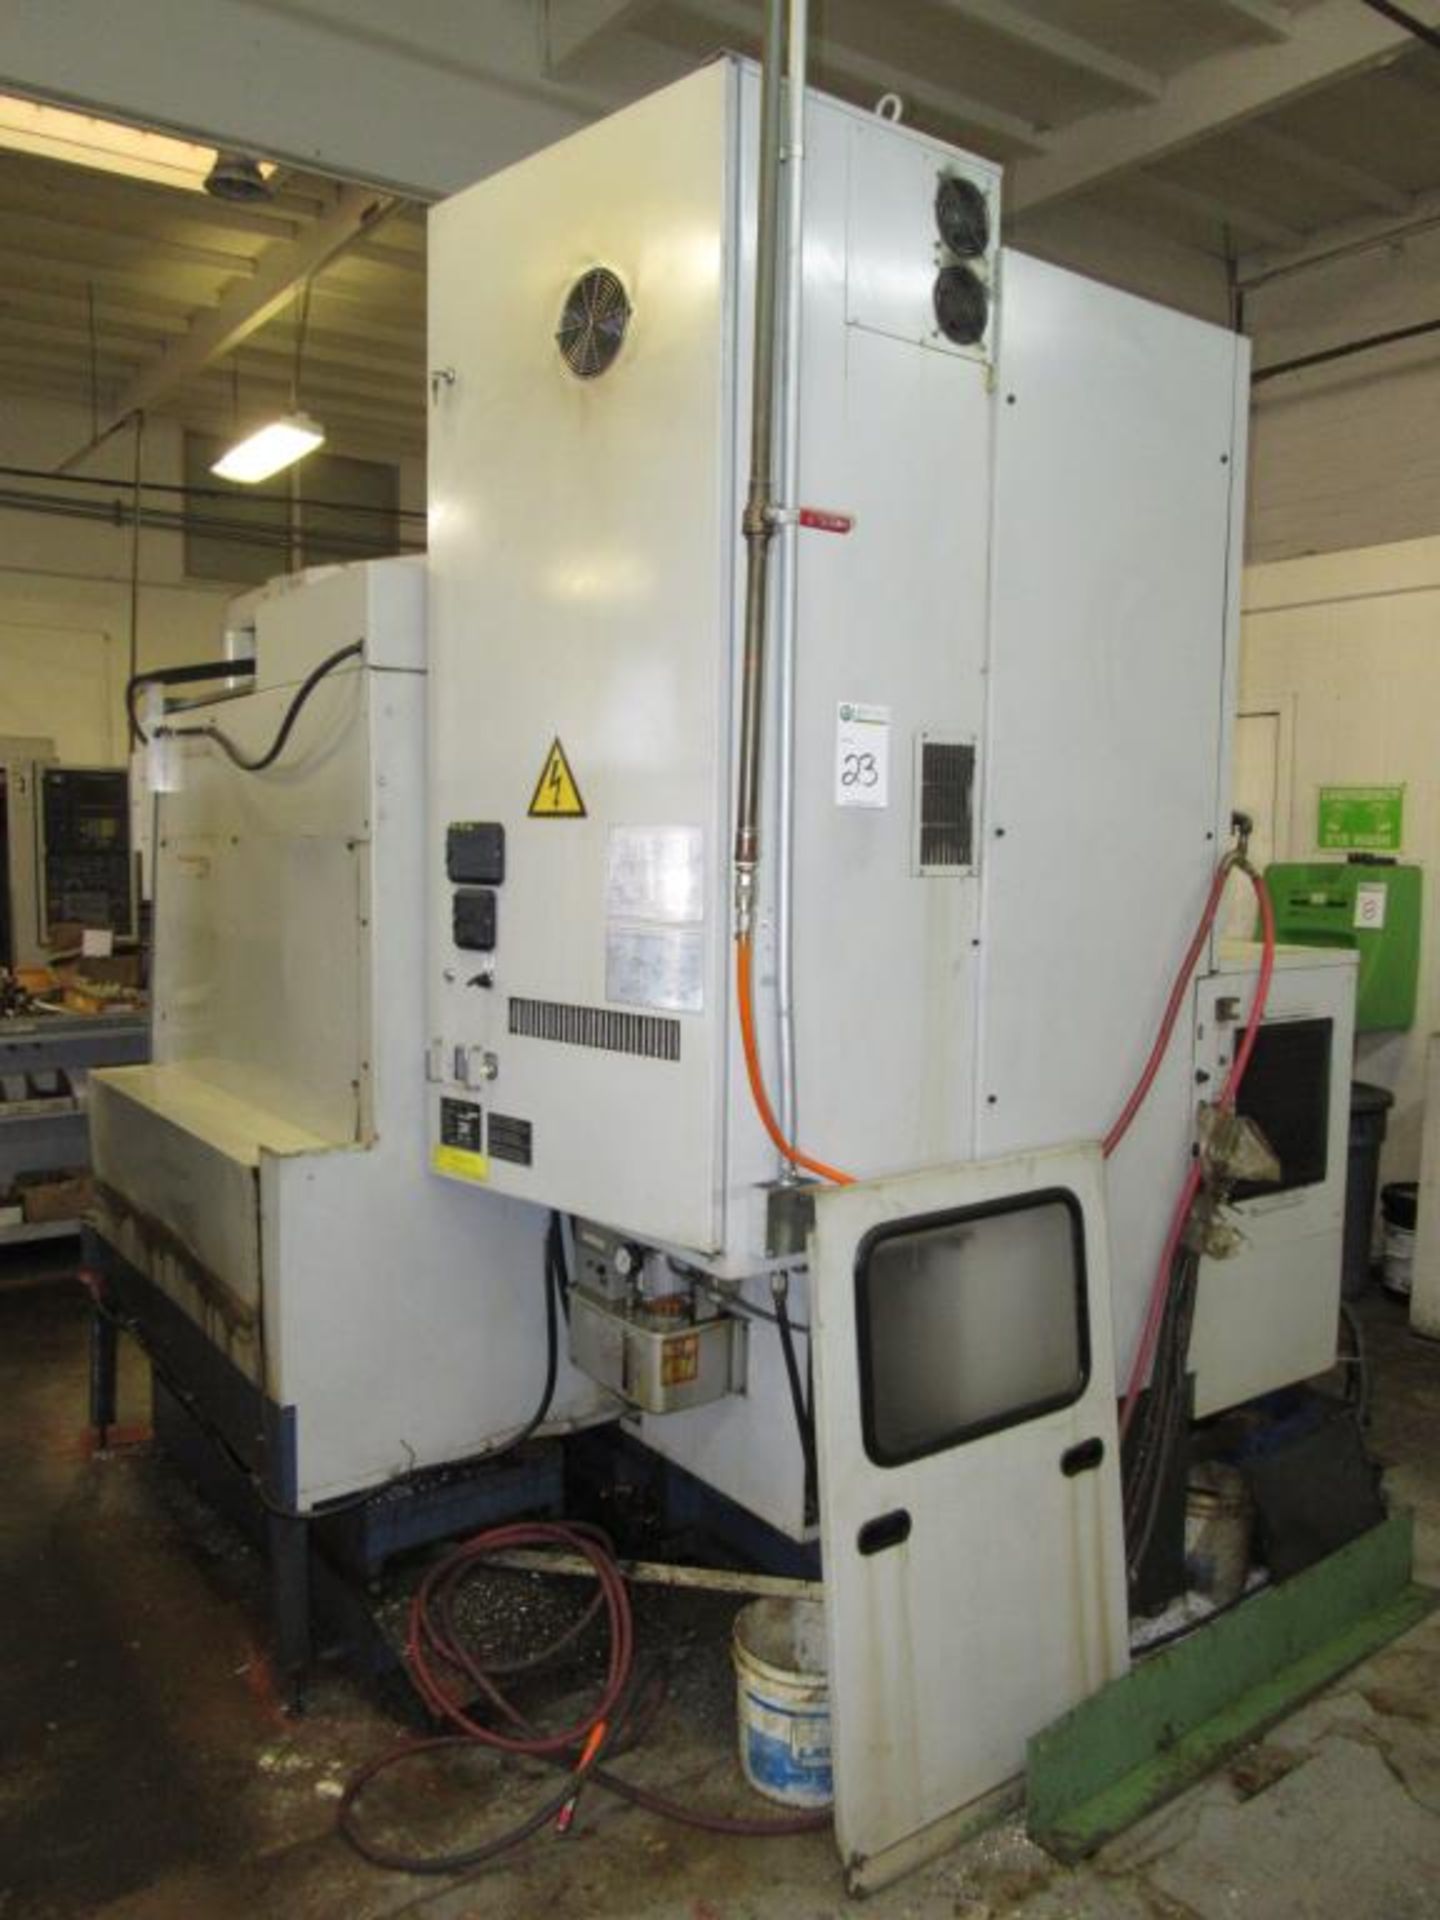 Mori Seiki MV-40B 1990 - CNC Vertical Machining Center with MF-M4 3-Axis Control Panel, Table Size - Image 4 of 10